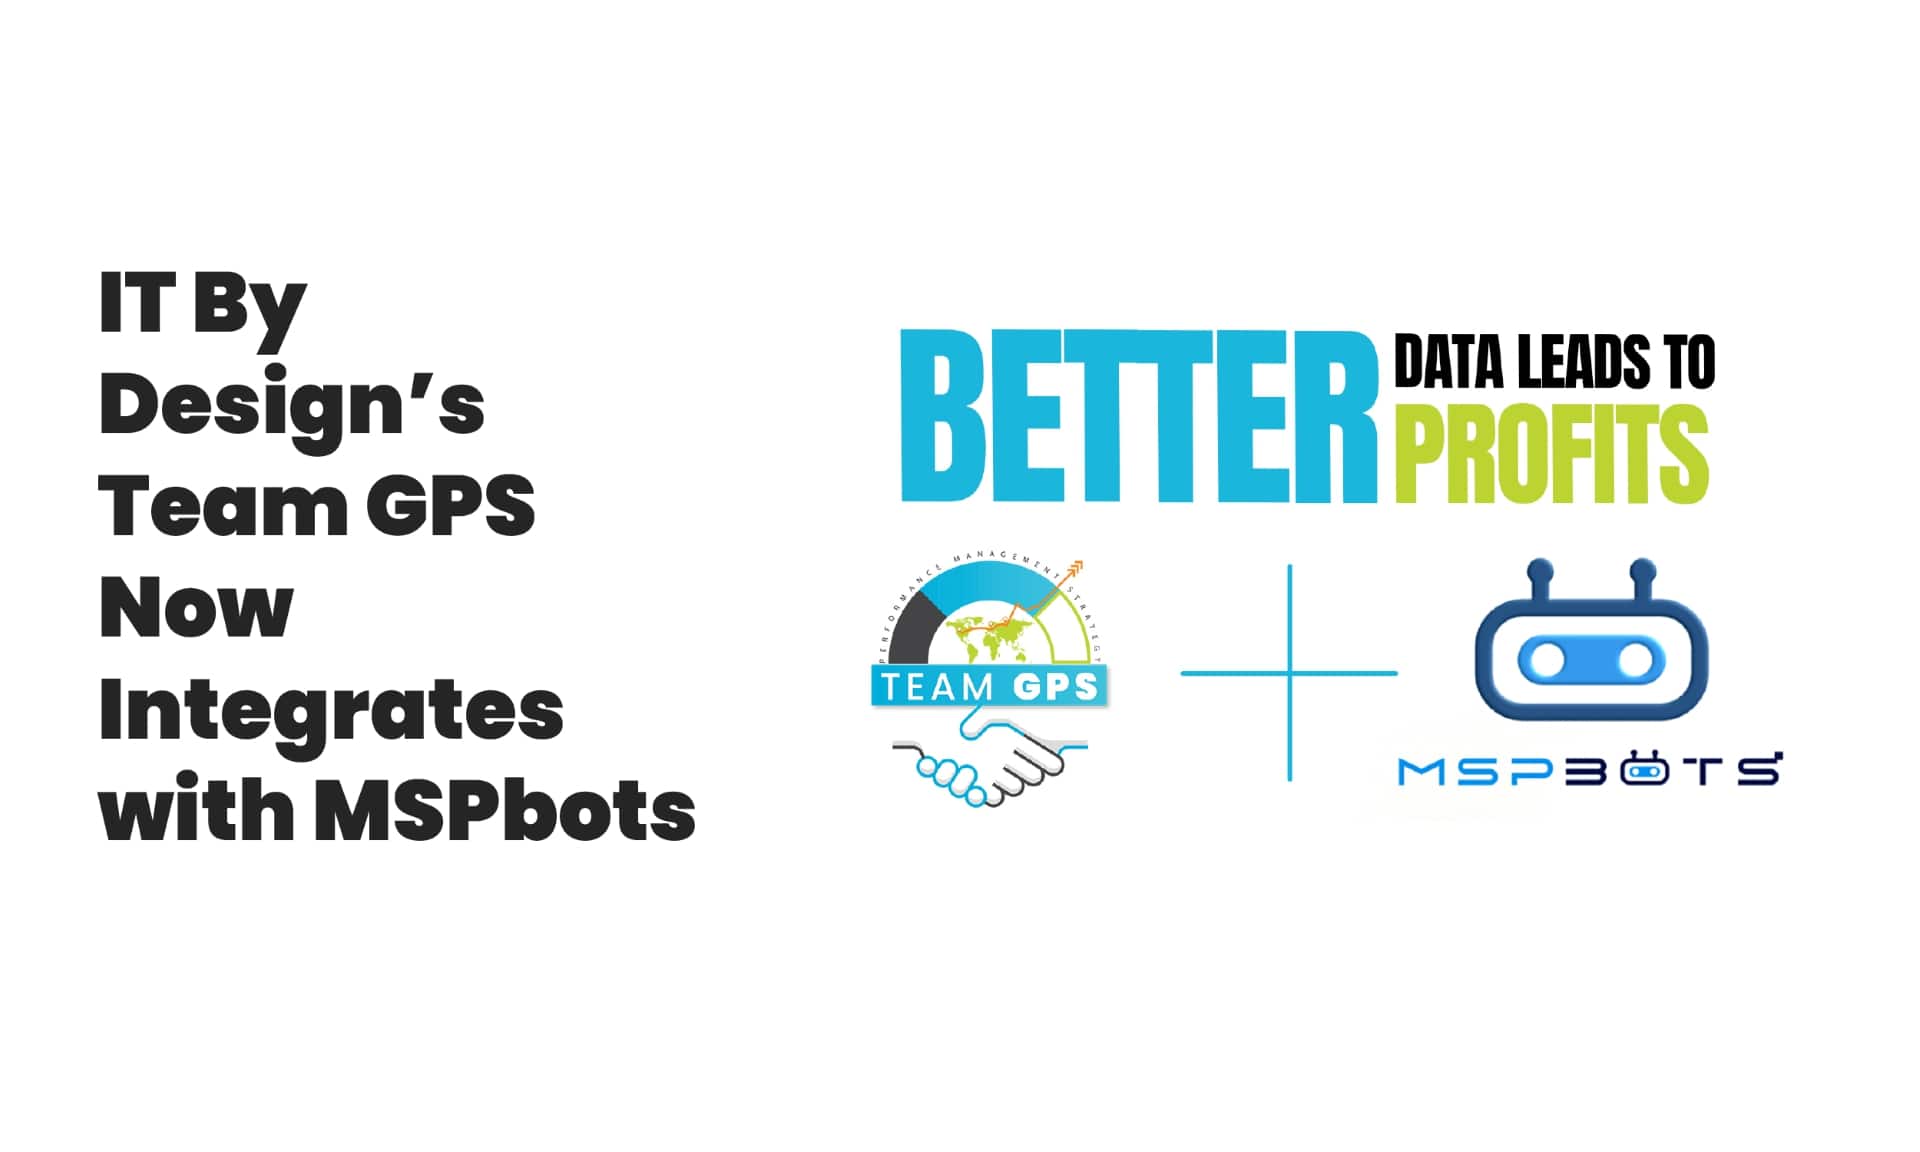 IT By Design’s Team GPS Now Integrates with MSPbots